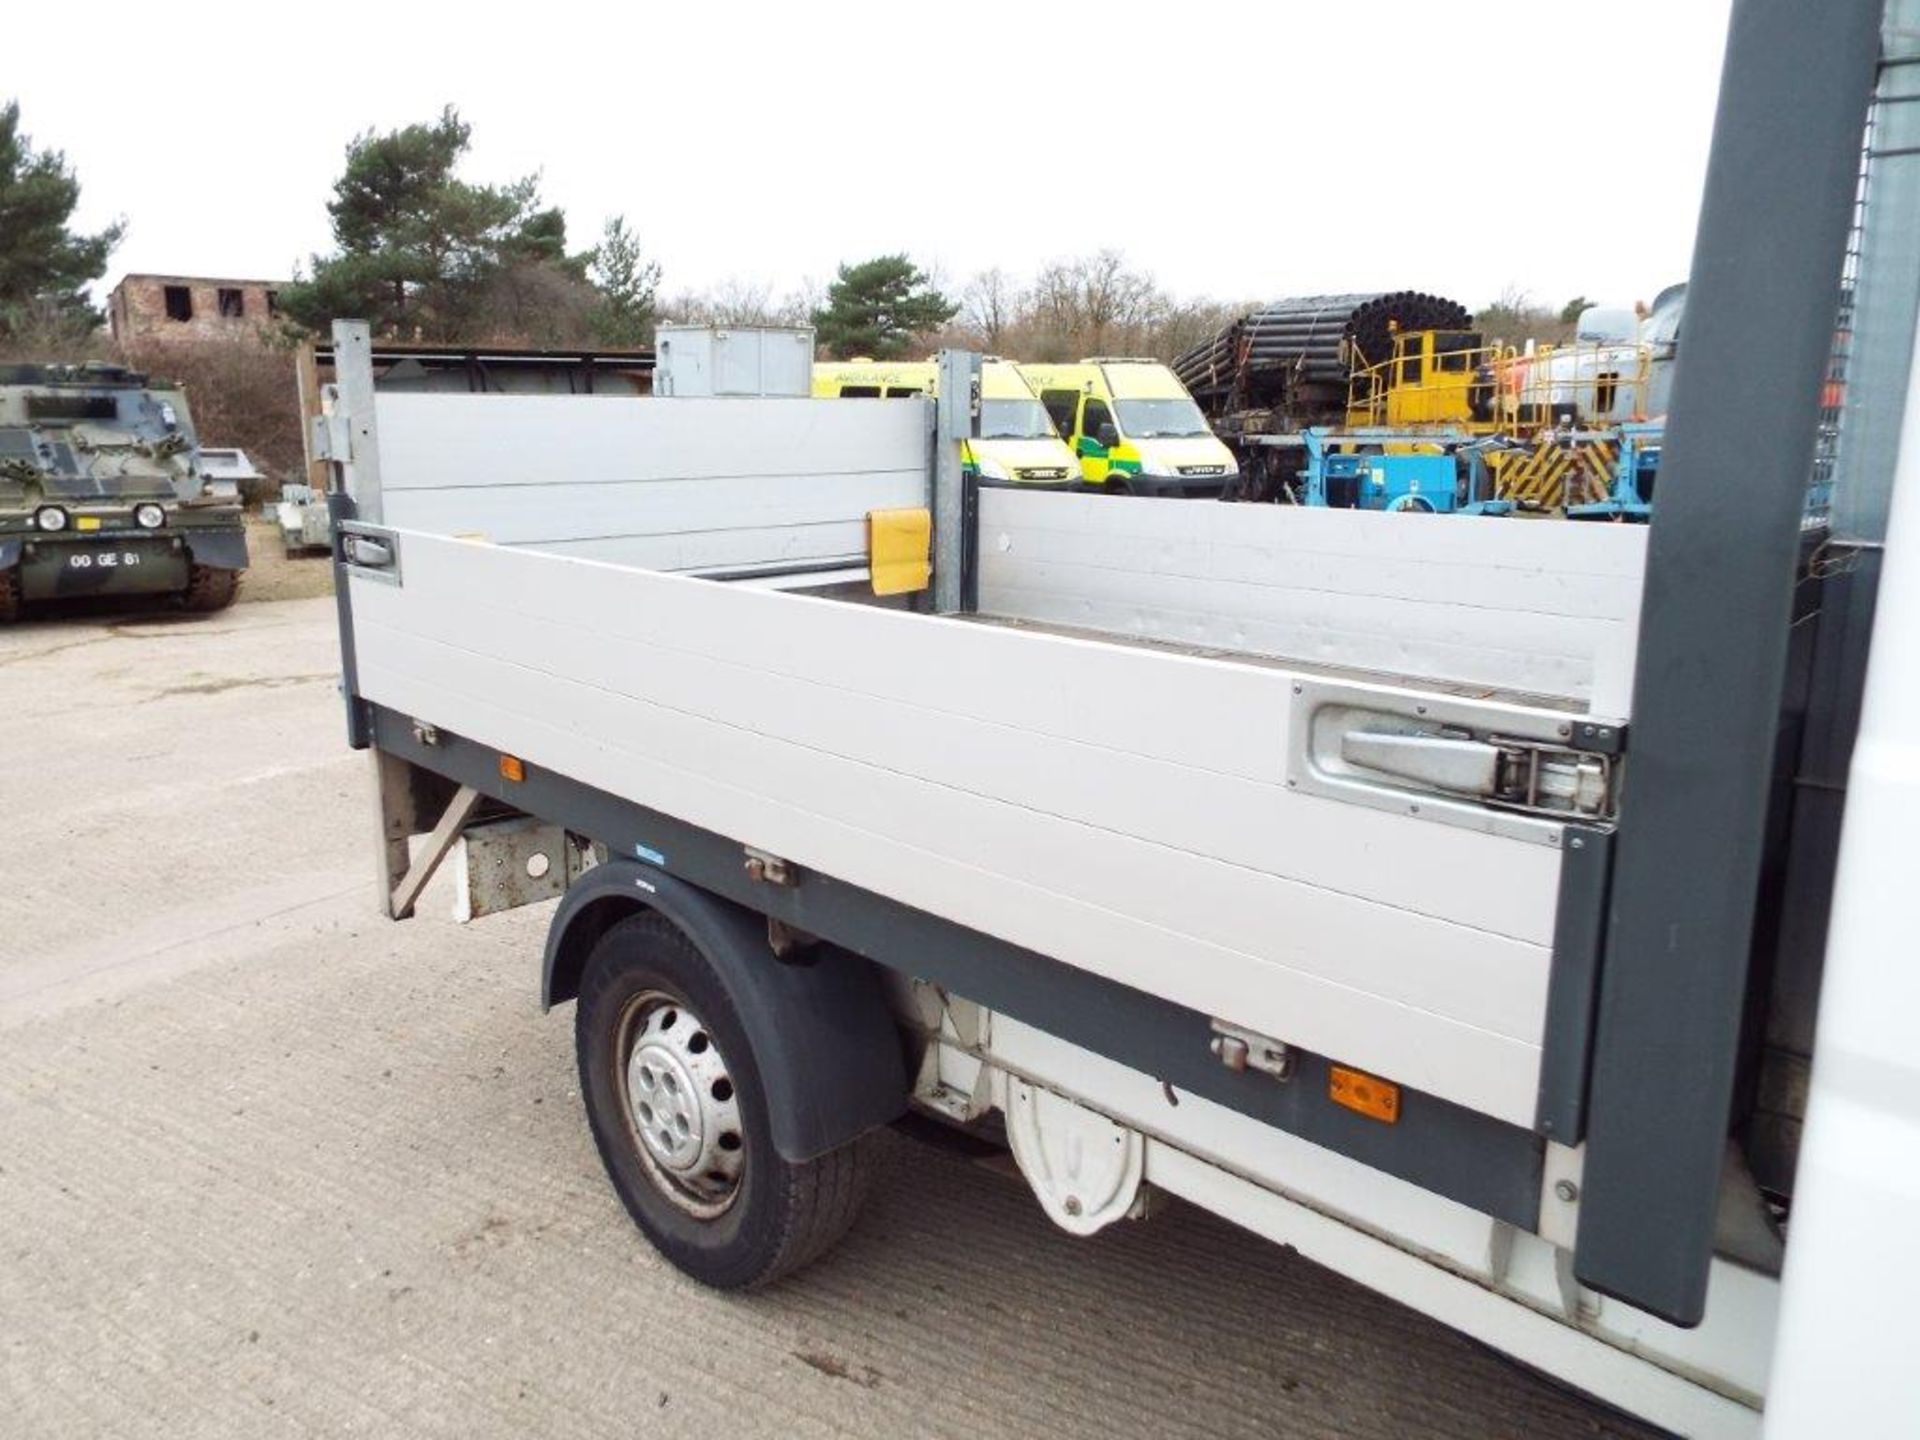 Citroen Relay 7 Seater Double Cab Dropside Pickup with 500kg Ratcliff Palfinger Tail Lift - Image 15 of 29